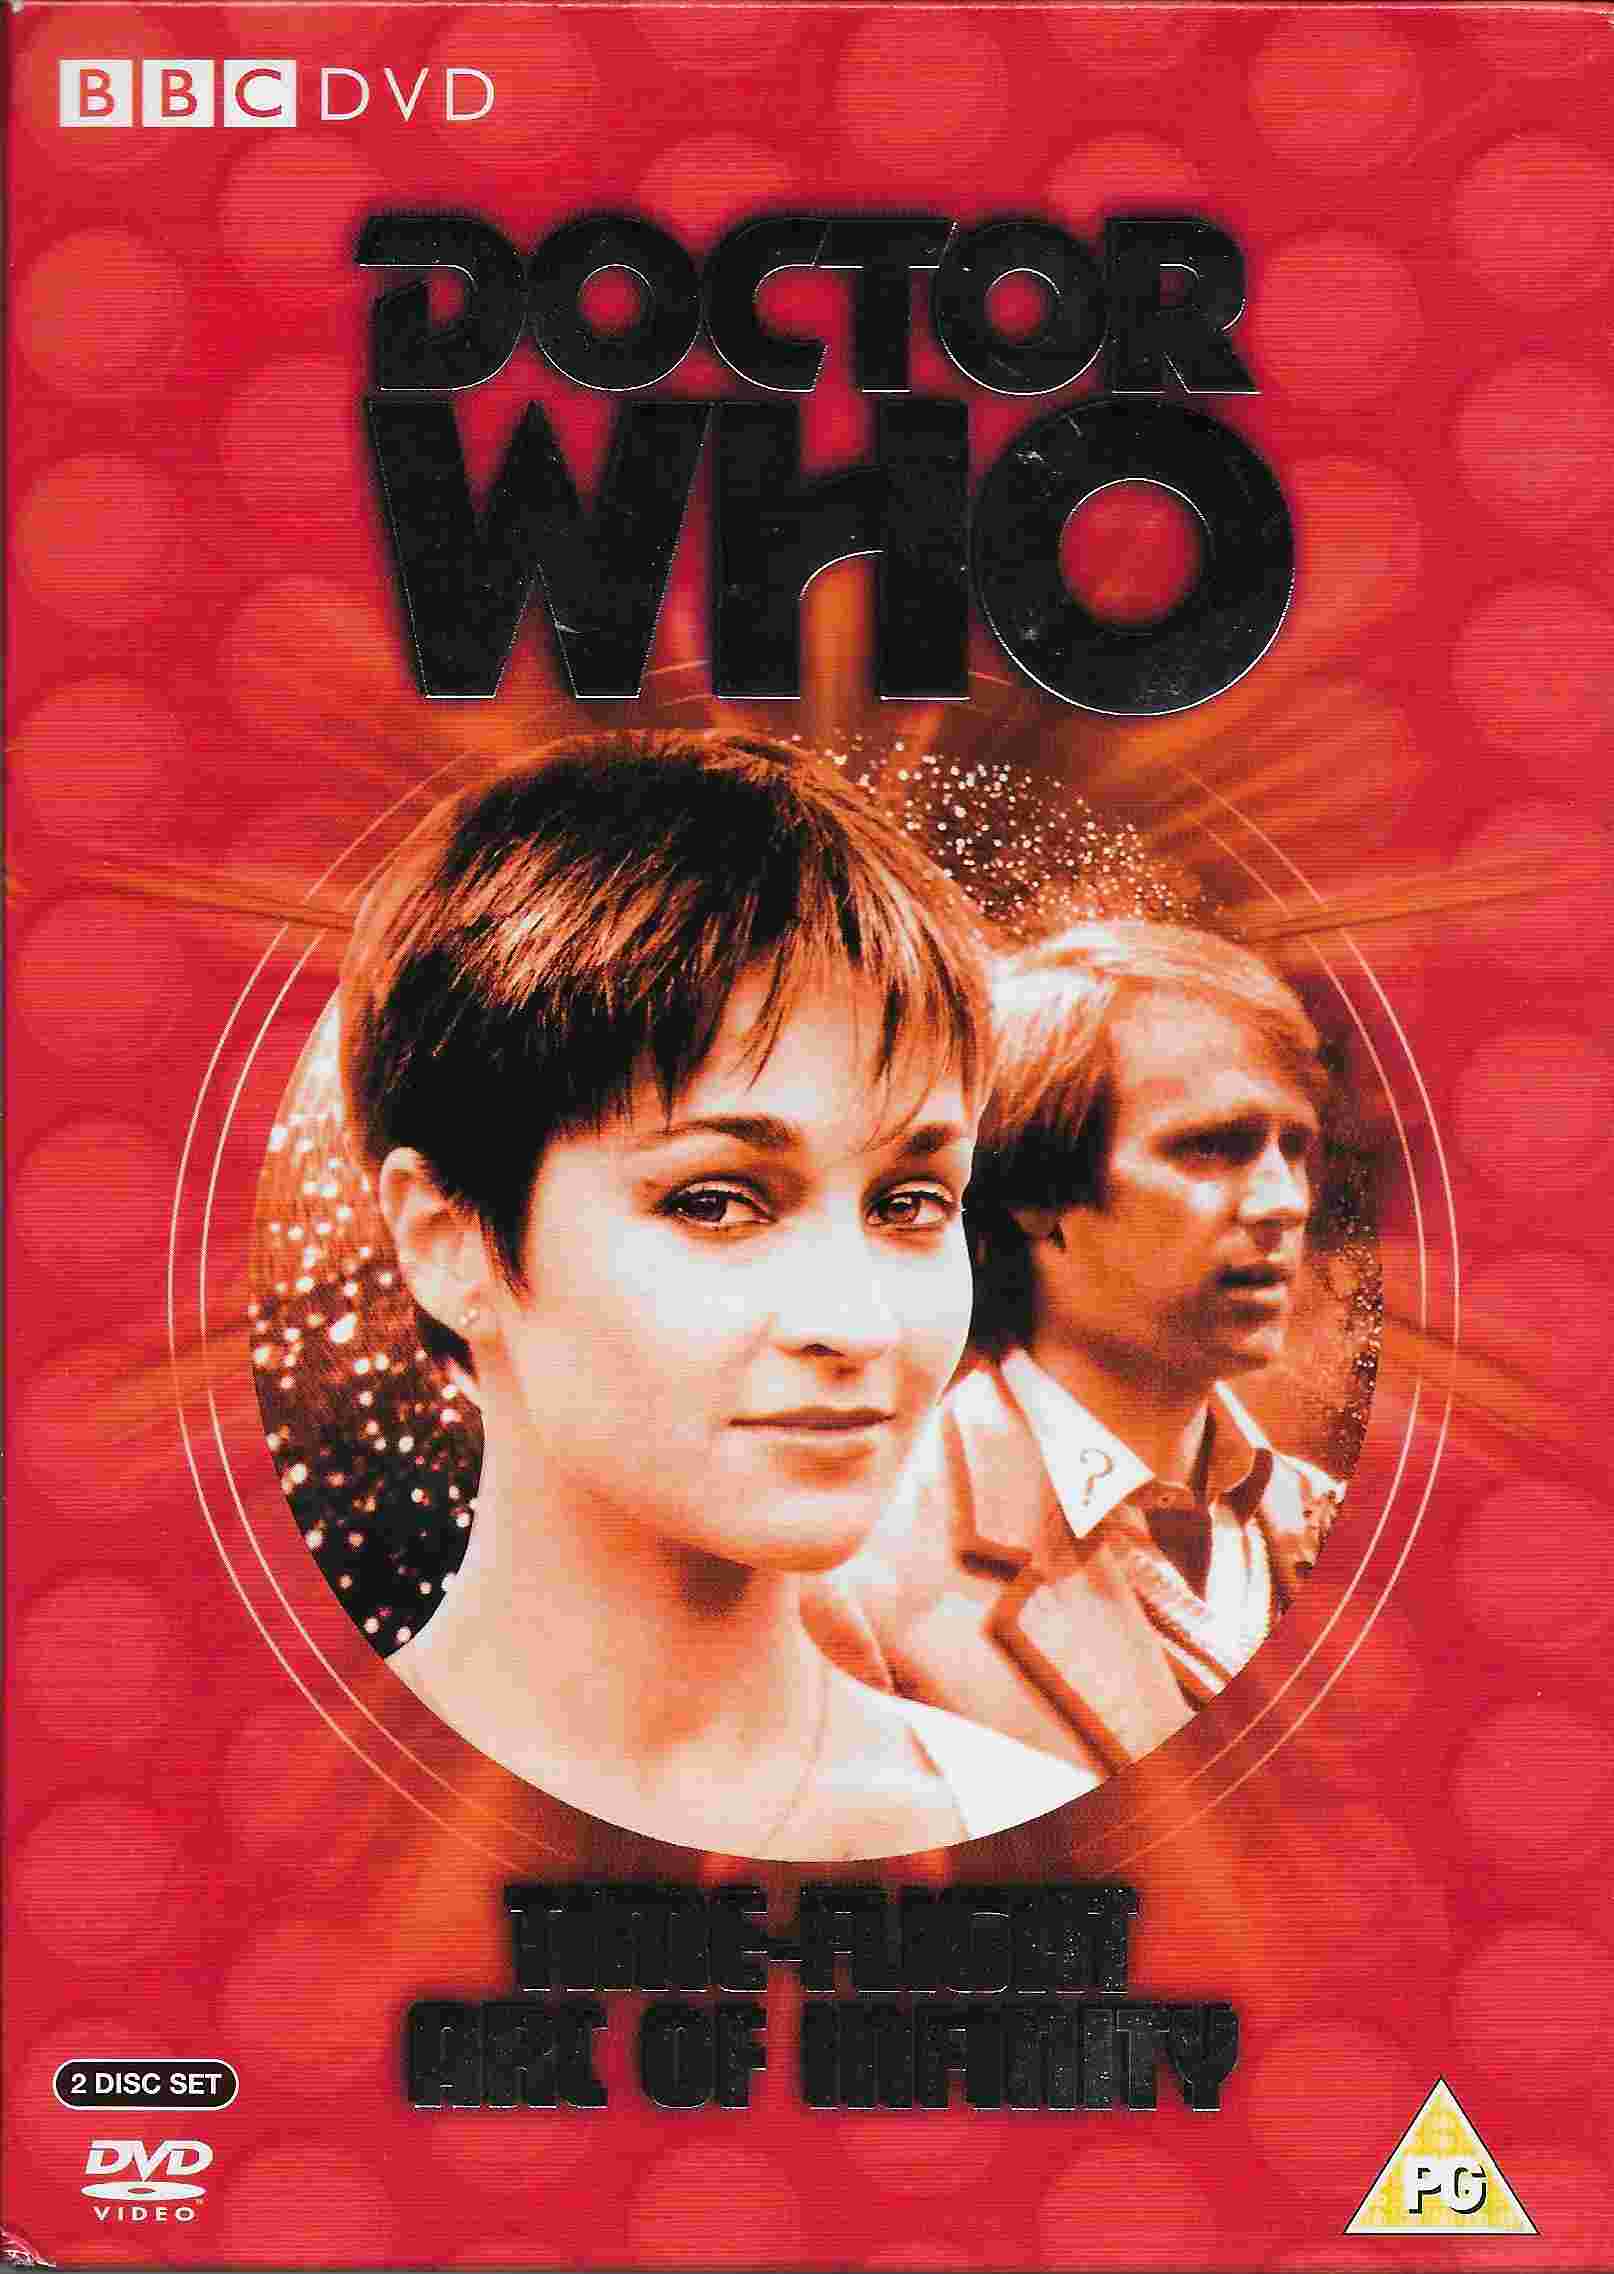 Picture of BBCDVD 2327 Doctor Who - Time-flight / Arc of Infinity by artist Peter Grimwade / Johnny Byrne from the BBC records and Tapes library